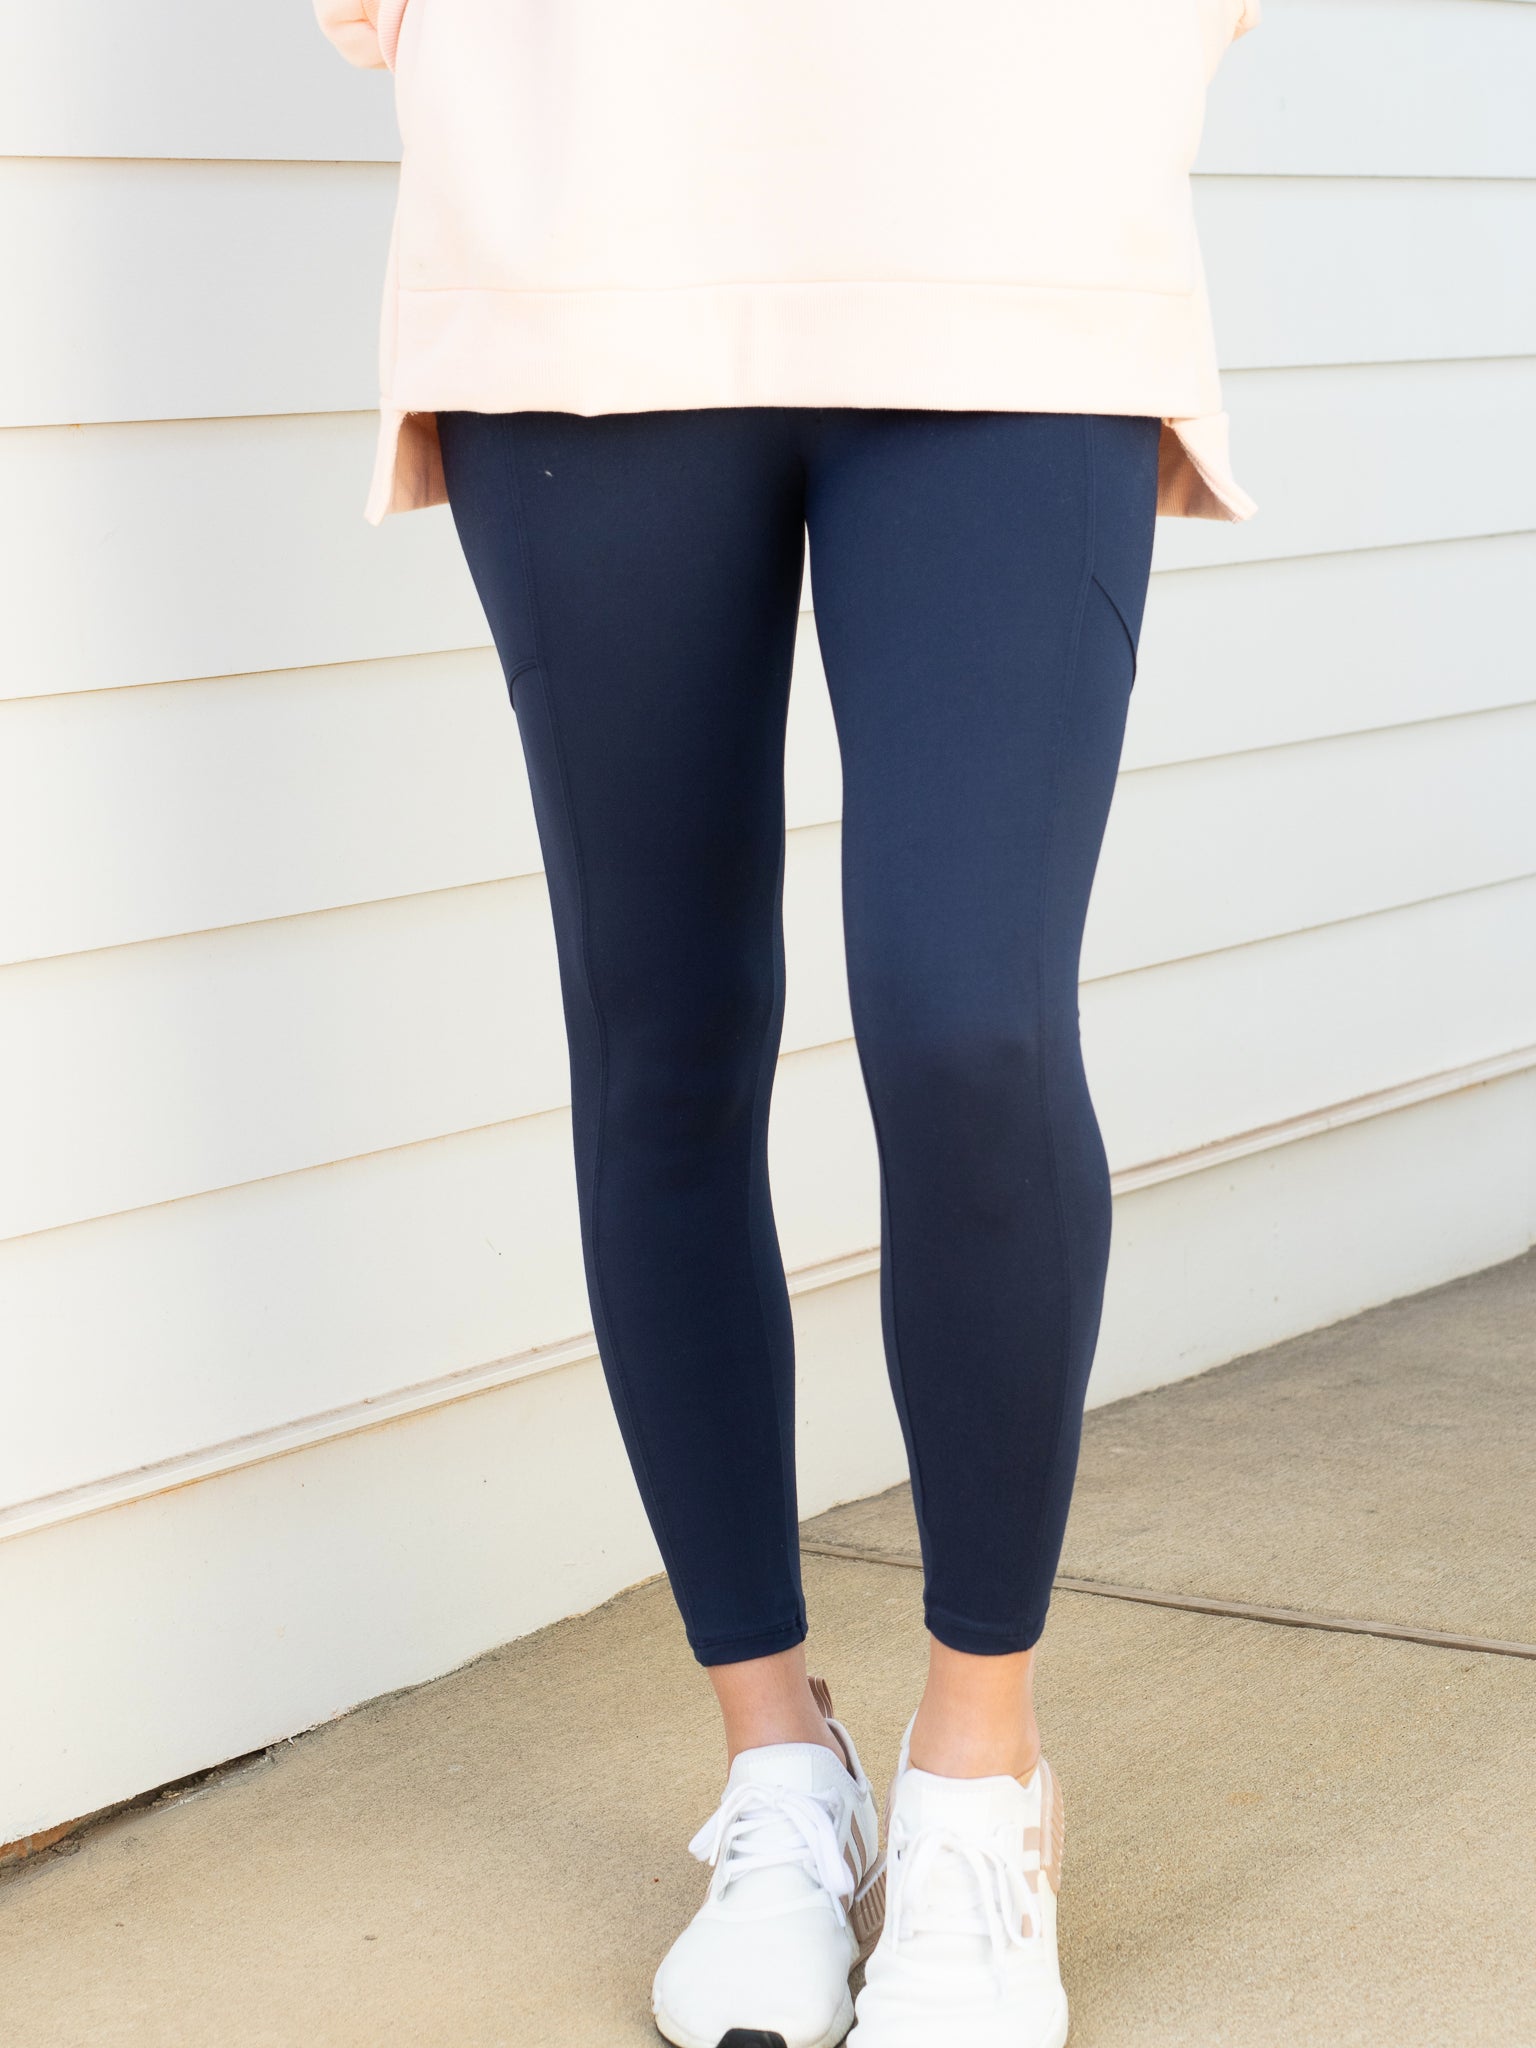 Crushing Goals Leggings - Navy – Initial Outfitters